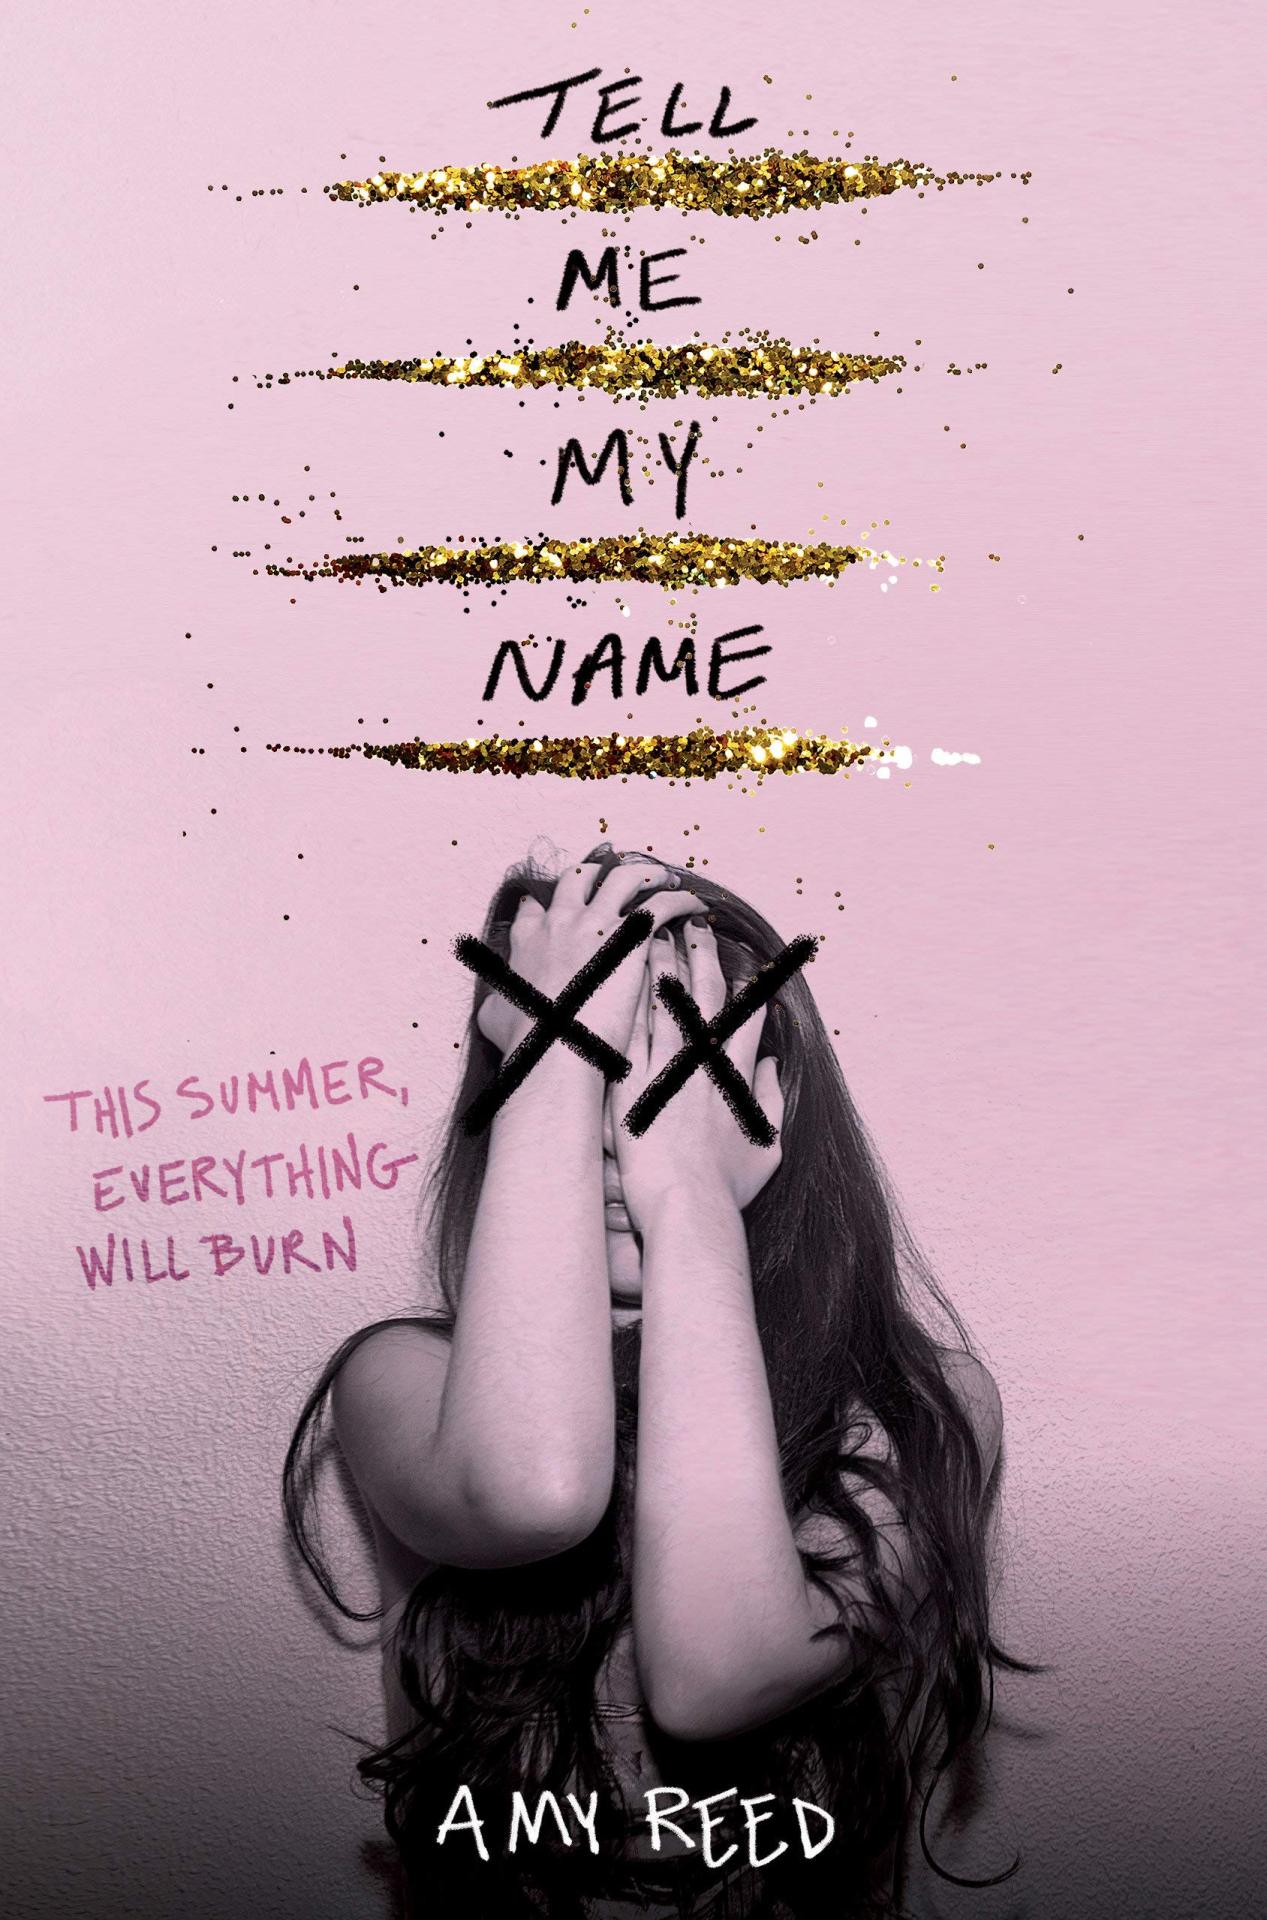 Ivy Avila
• Title: Tell Me My Name
• Category: Book
• Author: Amy Reed
• Status: First Billed
• Orientation: Polysexual - NOS
Check the read-more to see if Ivy survives, and for other trigger warnings.
[[MORE]]Ivy is alive at the end of the story. TW...